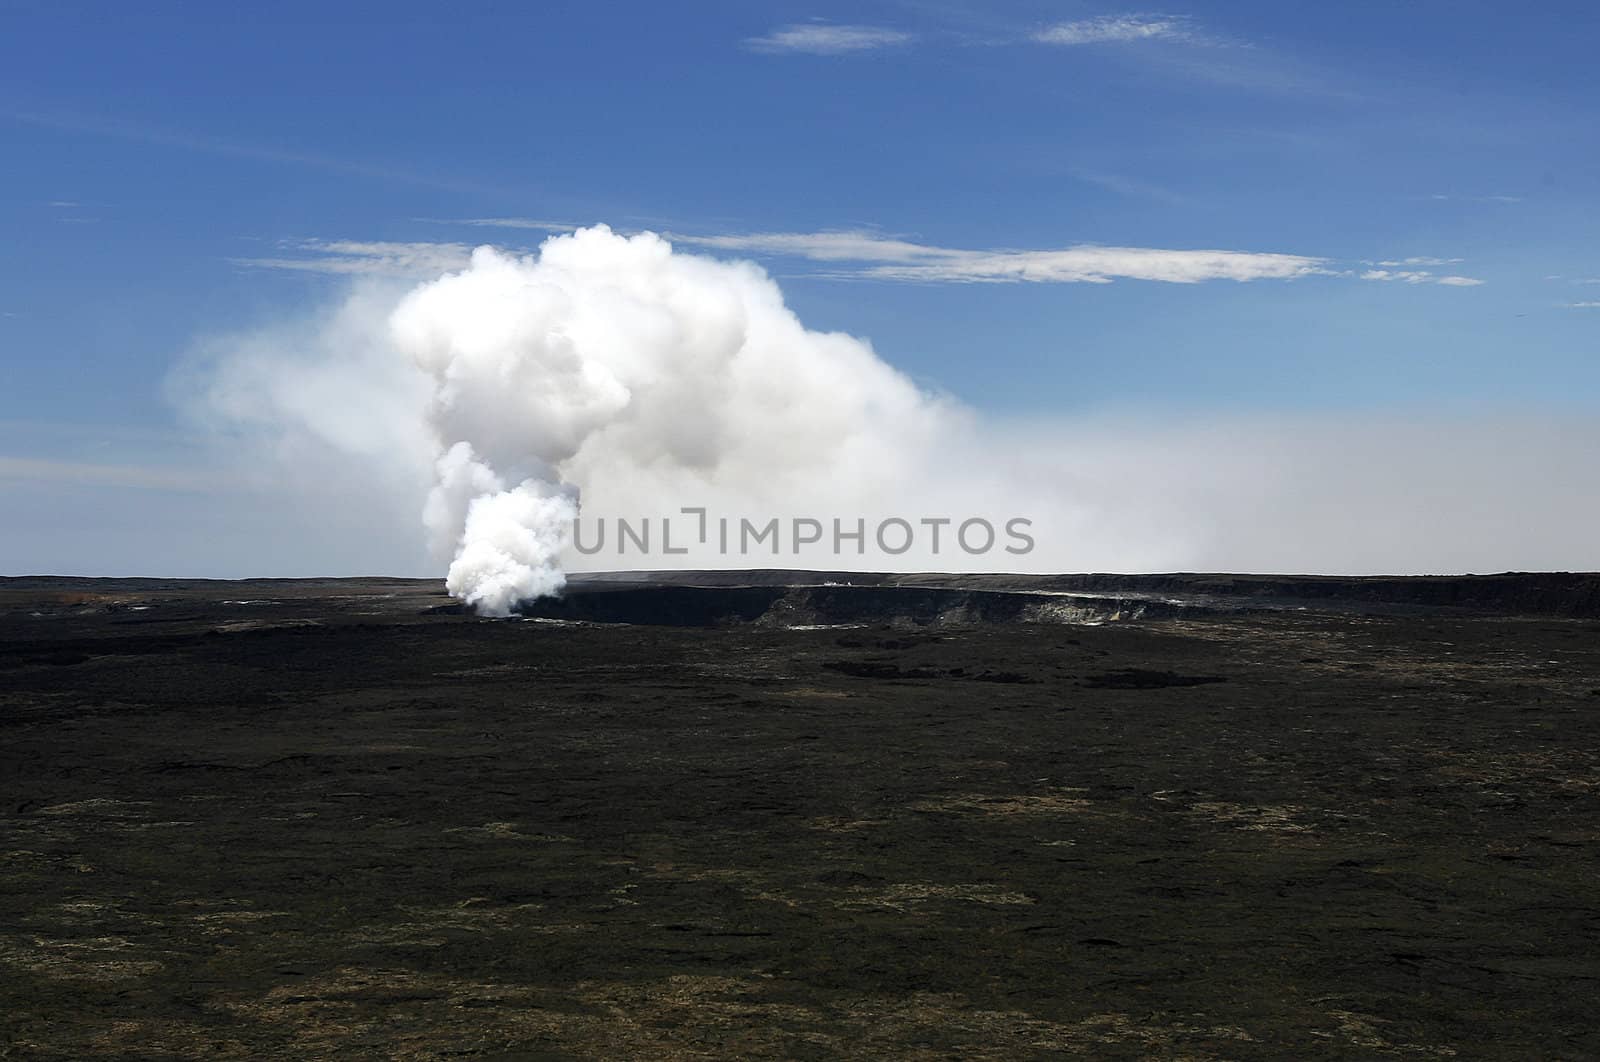 A plume of smoke coming out of a vent at Hualalai Volcano